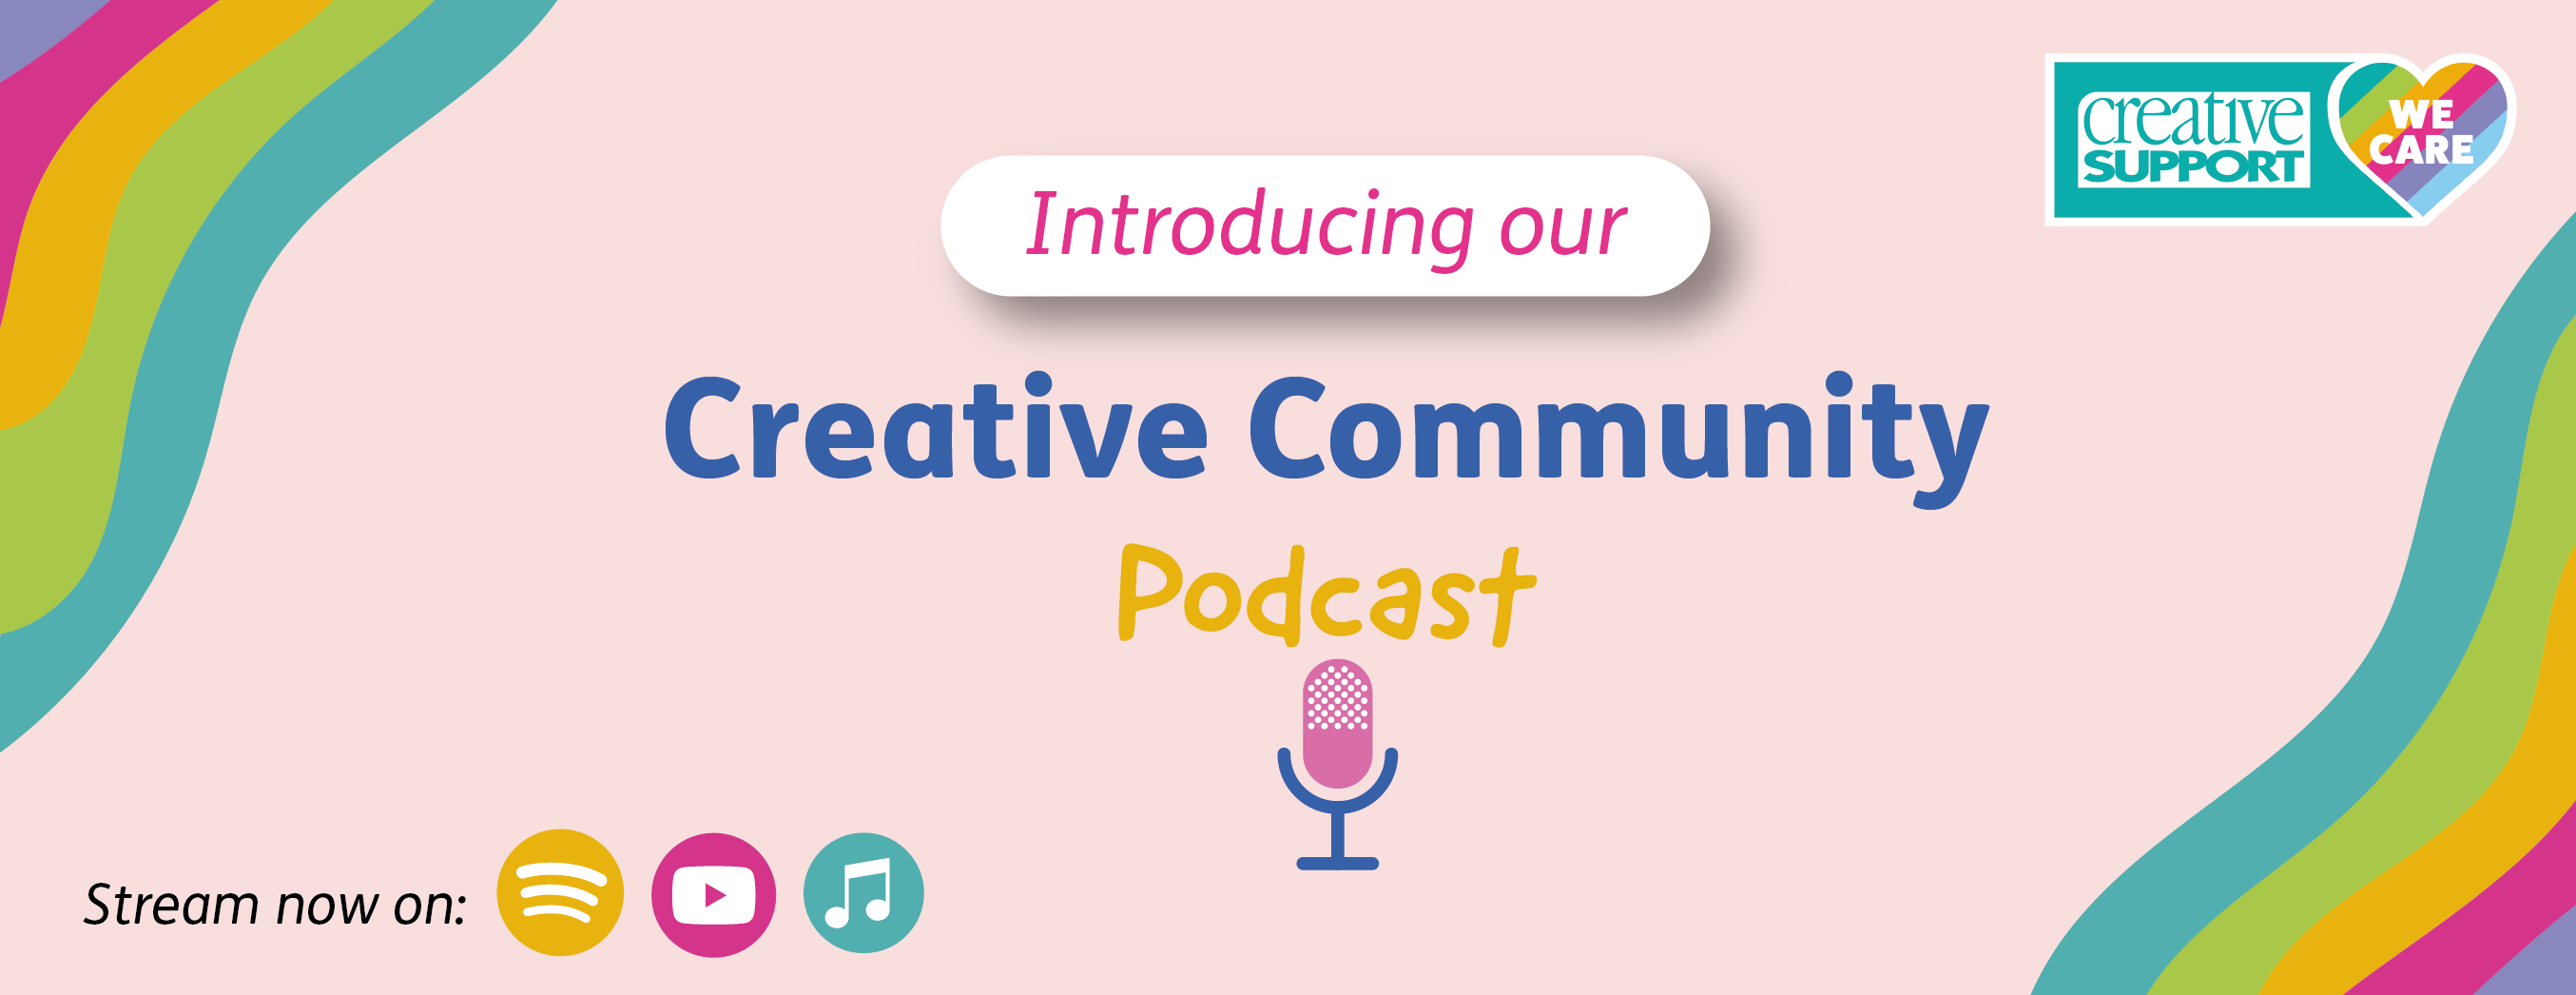 A pink banner with red, orange, green and teal wavy stripes on the top left and bottom right. The middle says 'Introducing our Creative Comunity Podcast'. Underneath is a graphic of a microphone. In the bottom left hand corner it says 'Stream now', followed by symbols for Spotify, Apple Music and YouTube.